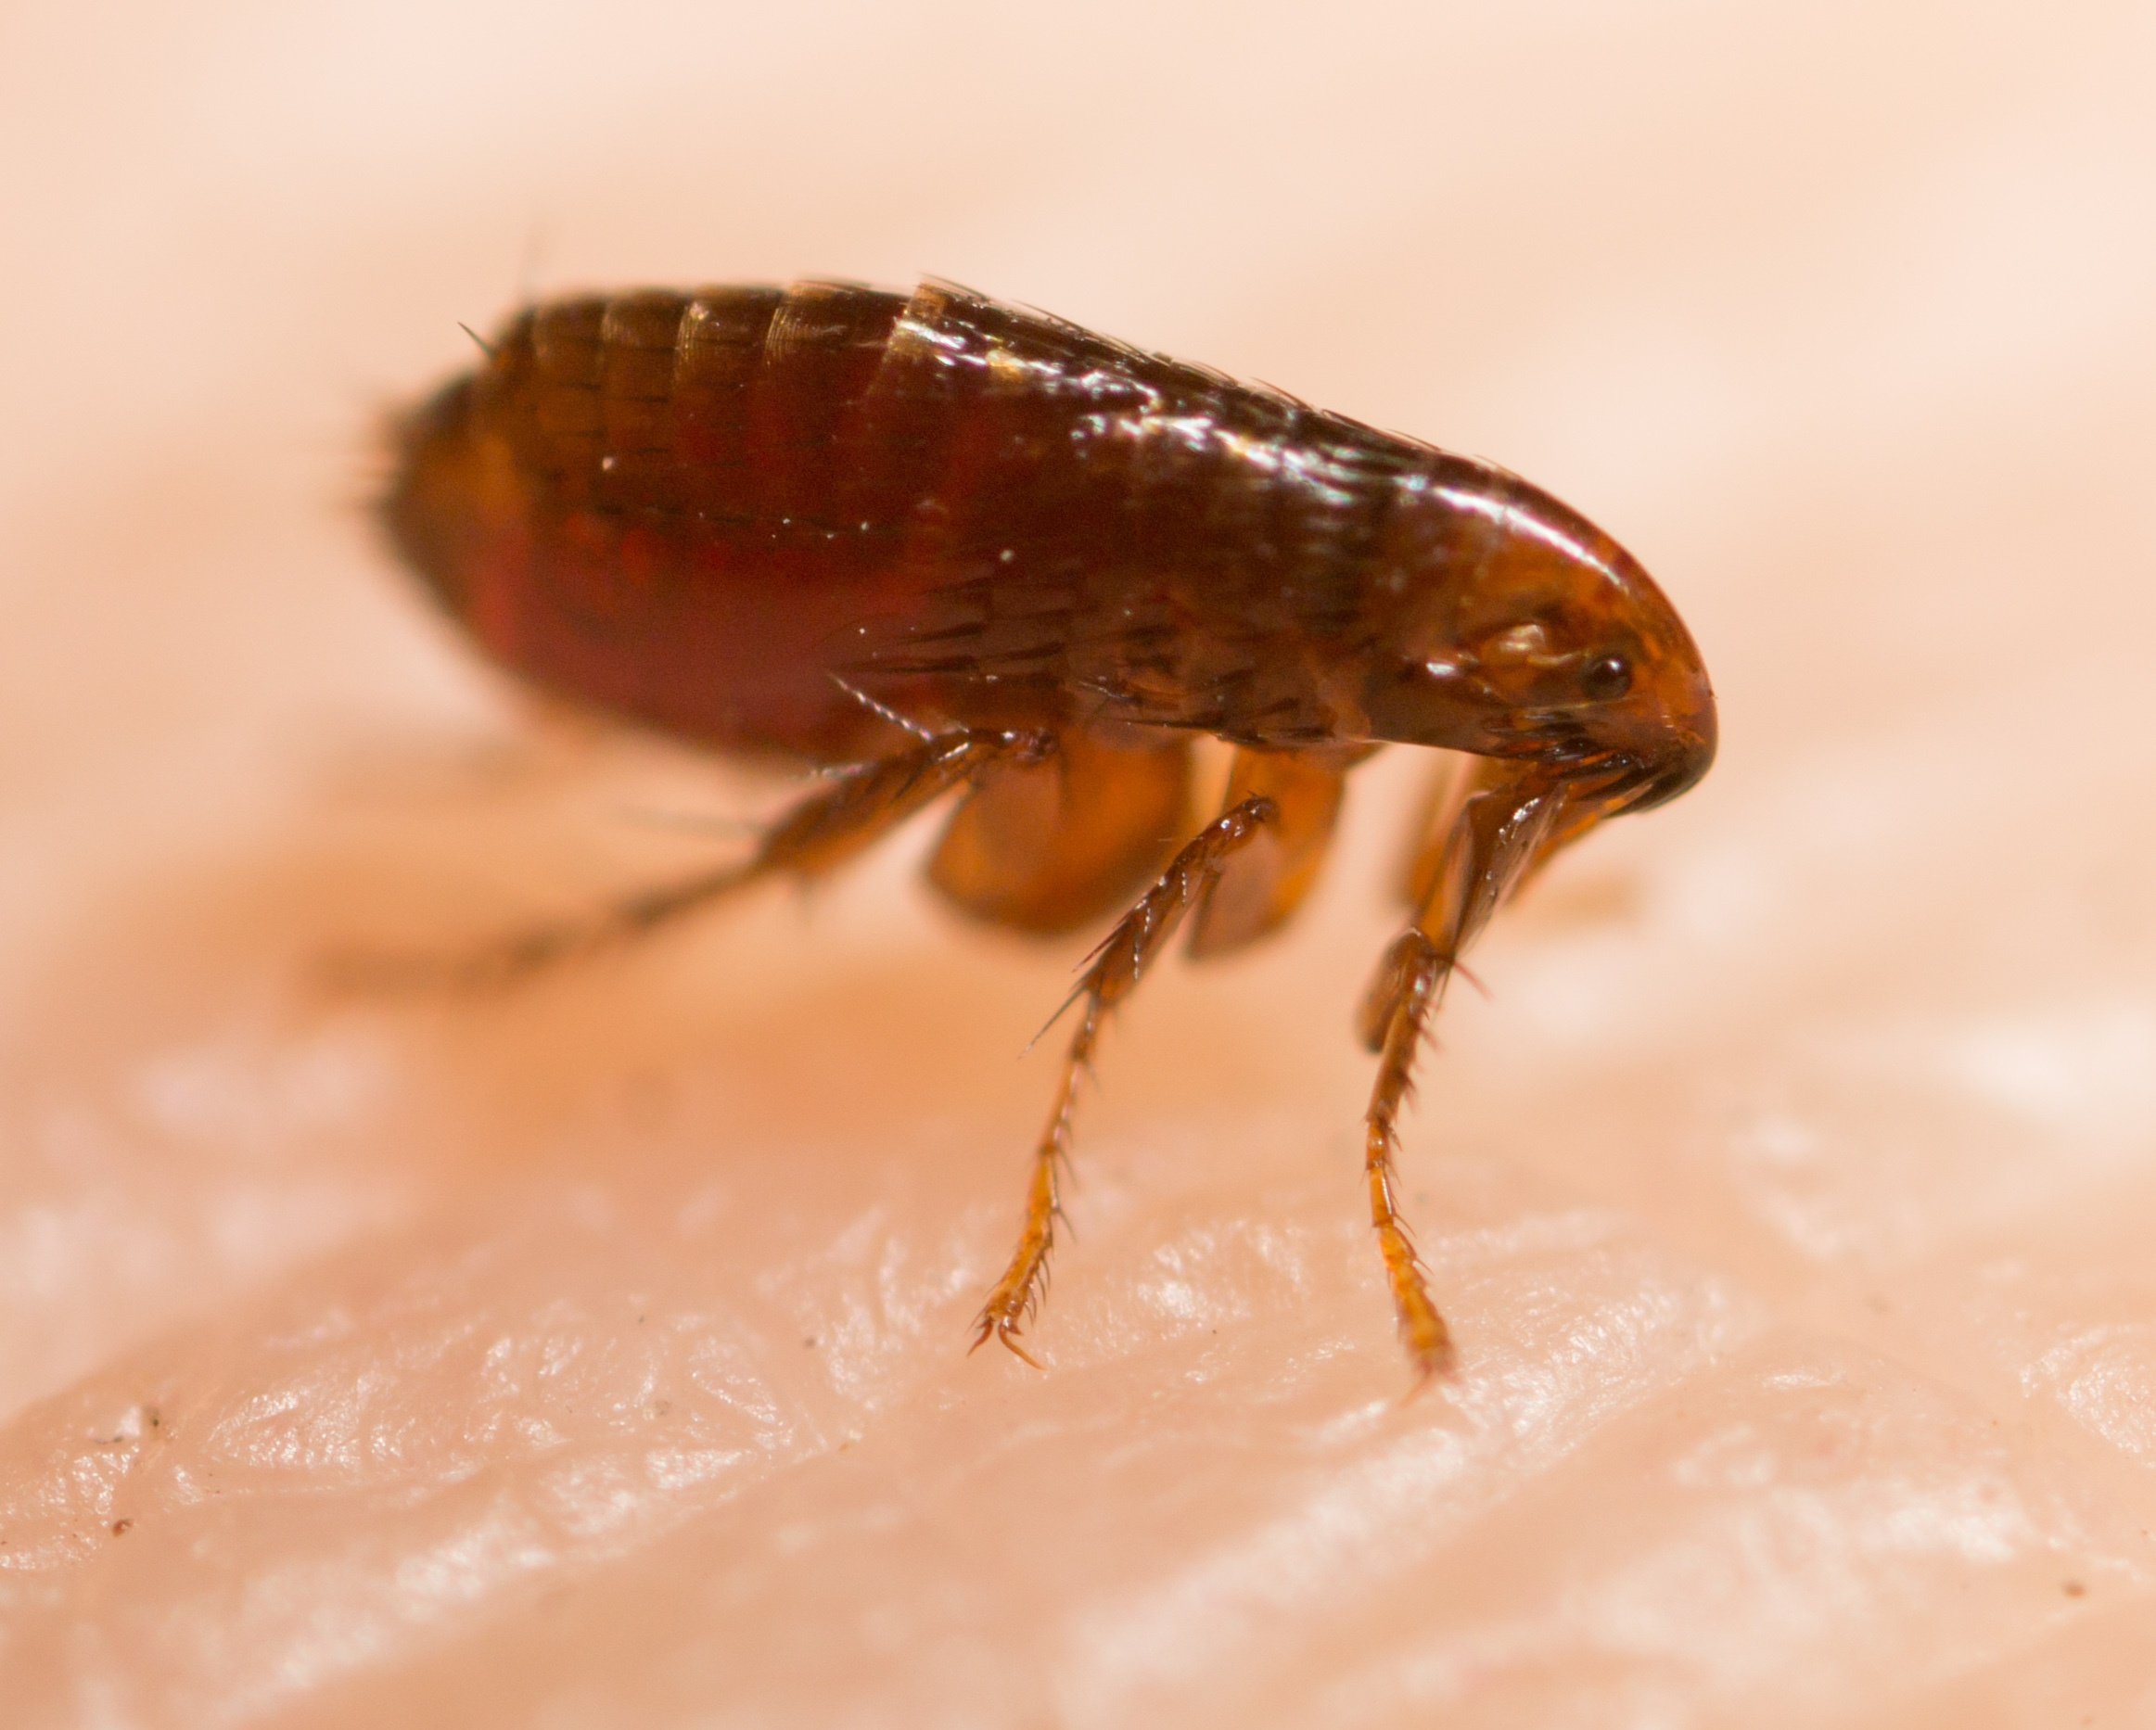 Fleas Springtails And Fungus Gnats What Small Bugs Live In Your Home